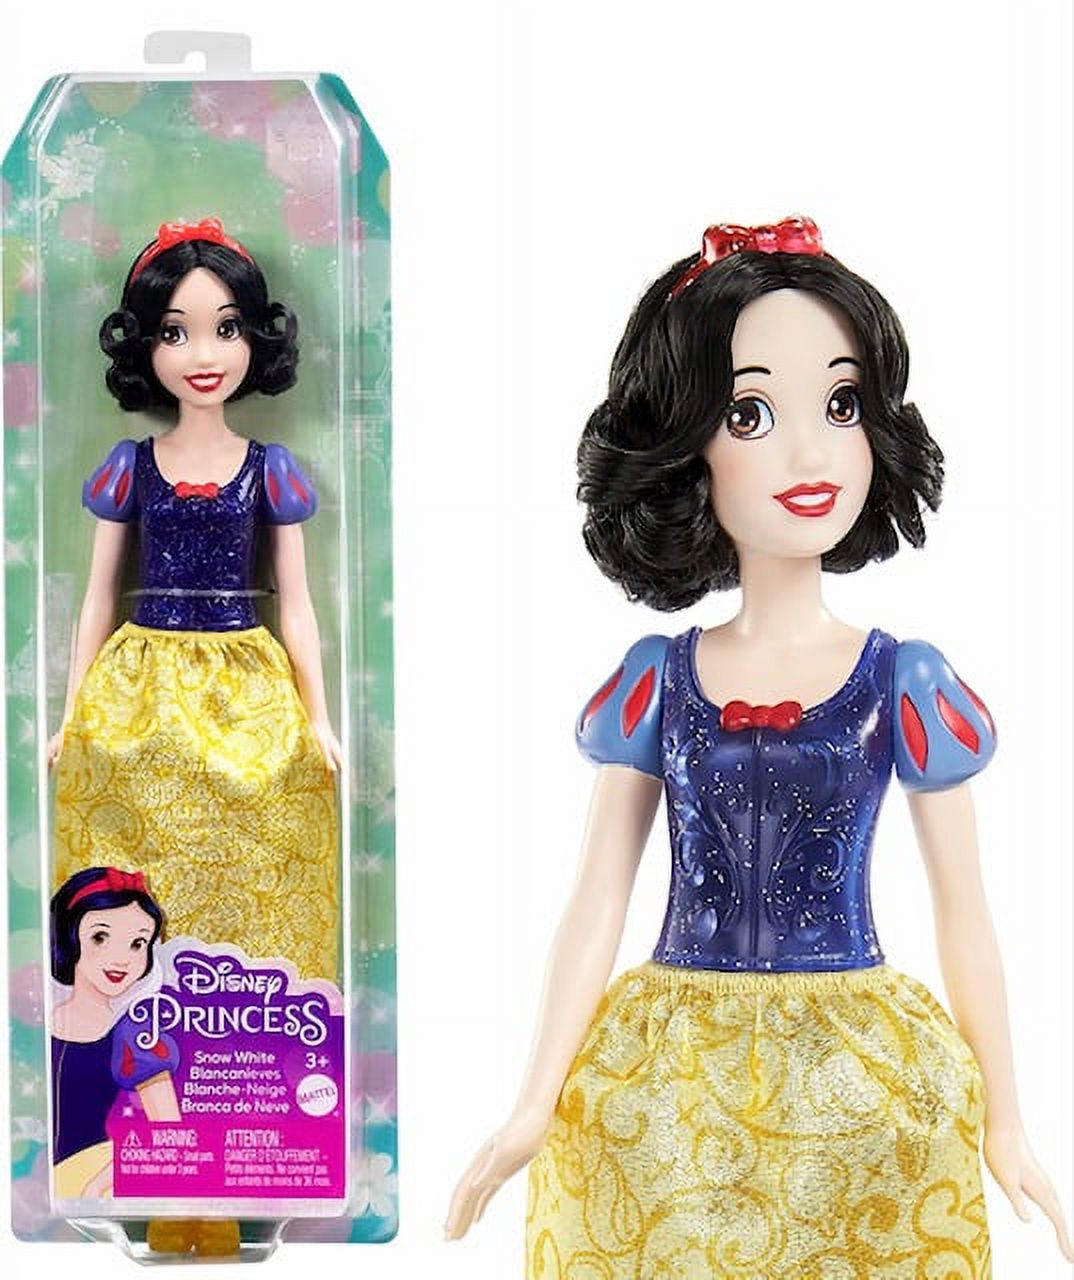 Disney Princess Dolls, New for 2023, Snow White Posable Fashion Doll with Sparkling Clothing and Accessories, Disney Movie Toys - image 1 of 6